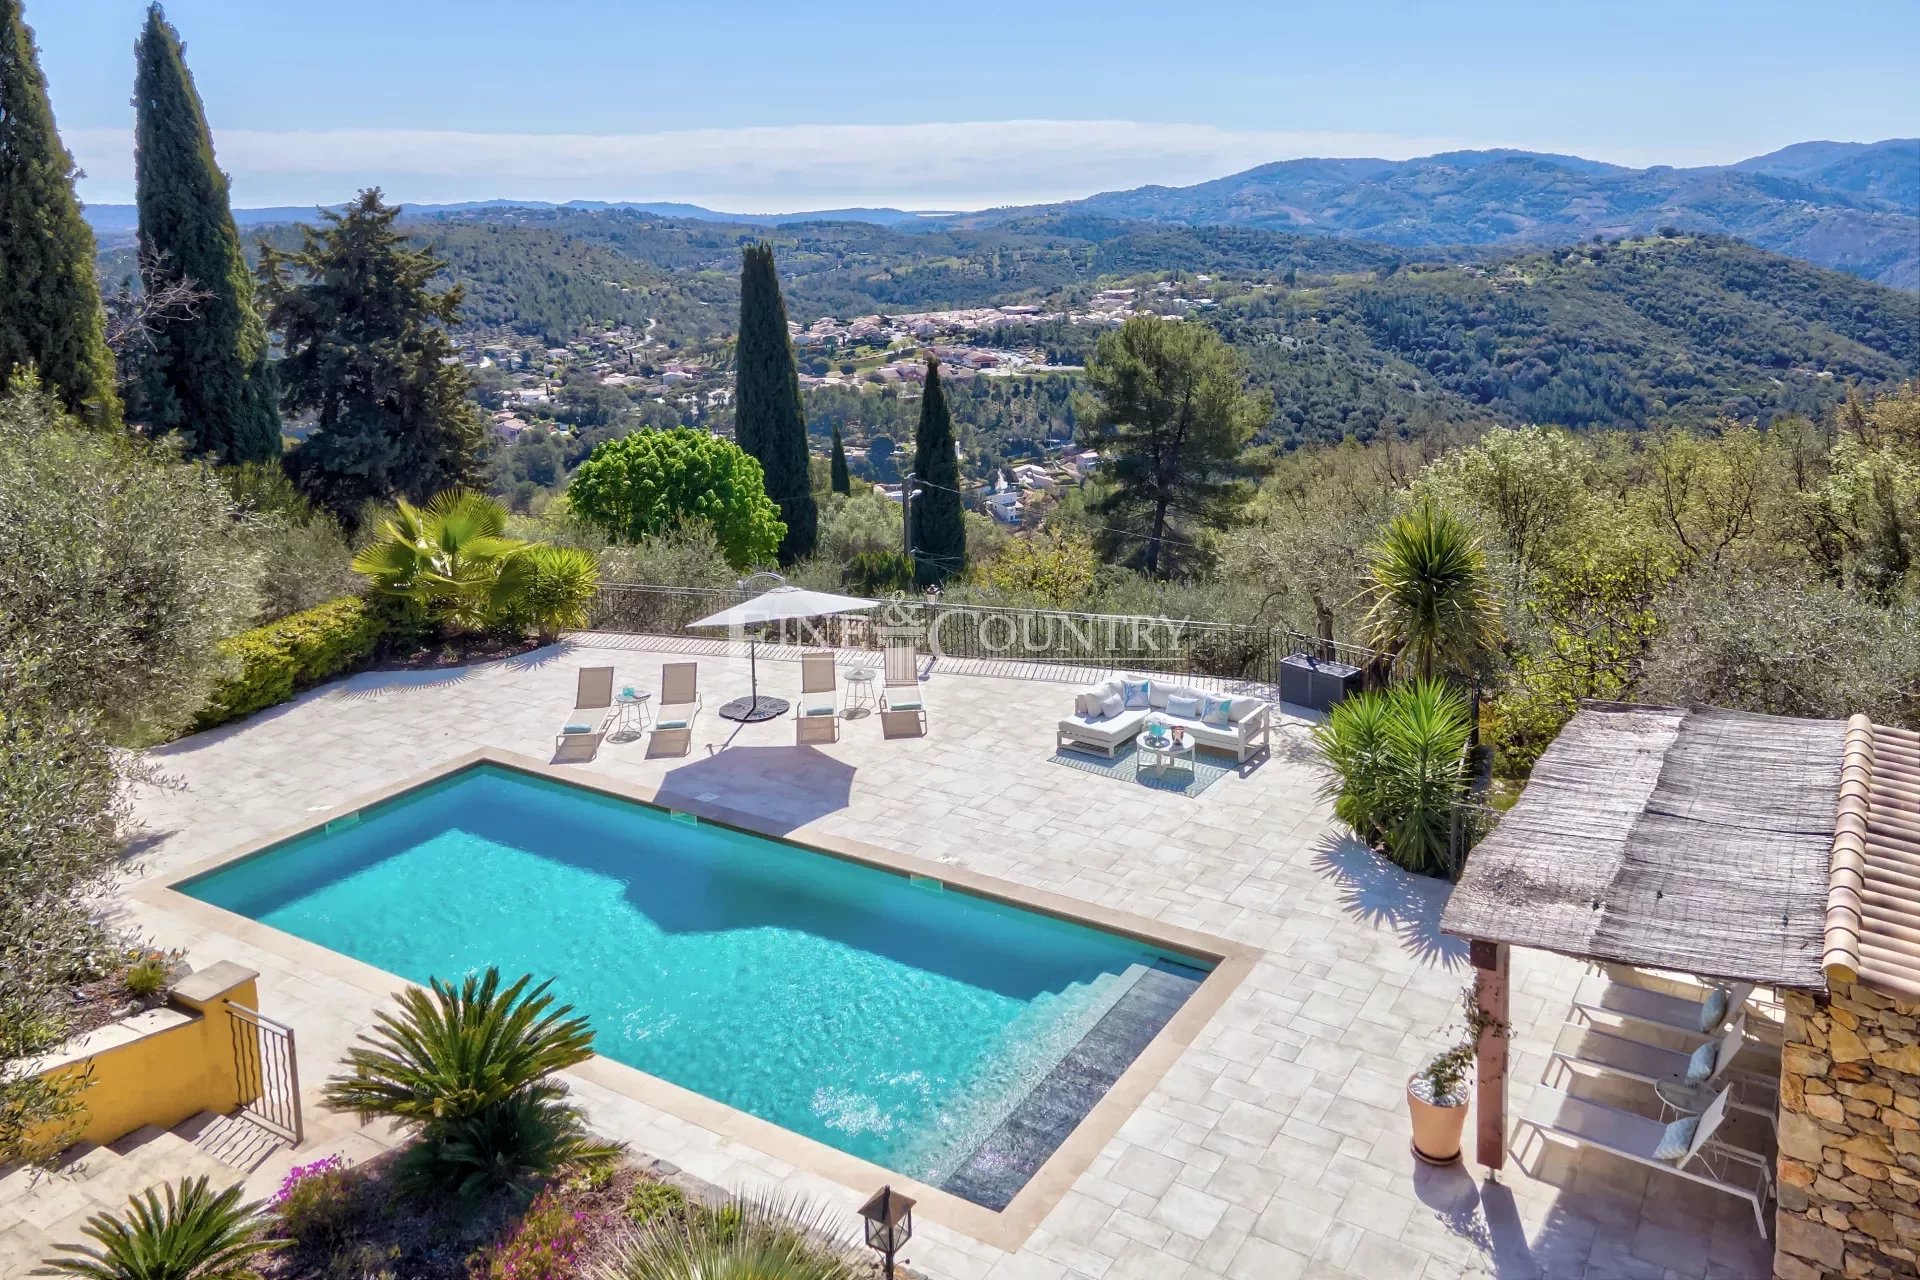 Villa for sale in Le Tignet, in the hills above Cannes